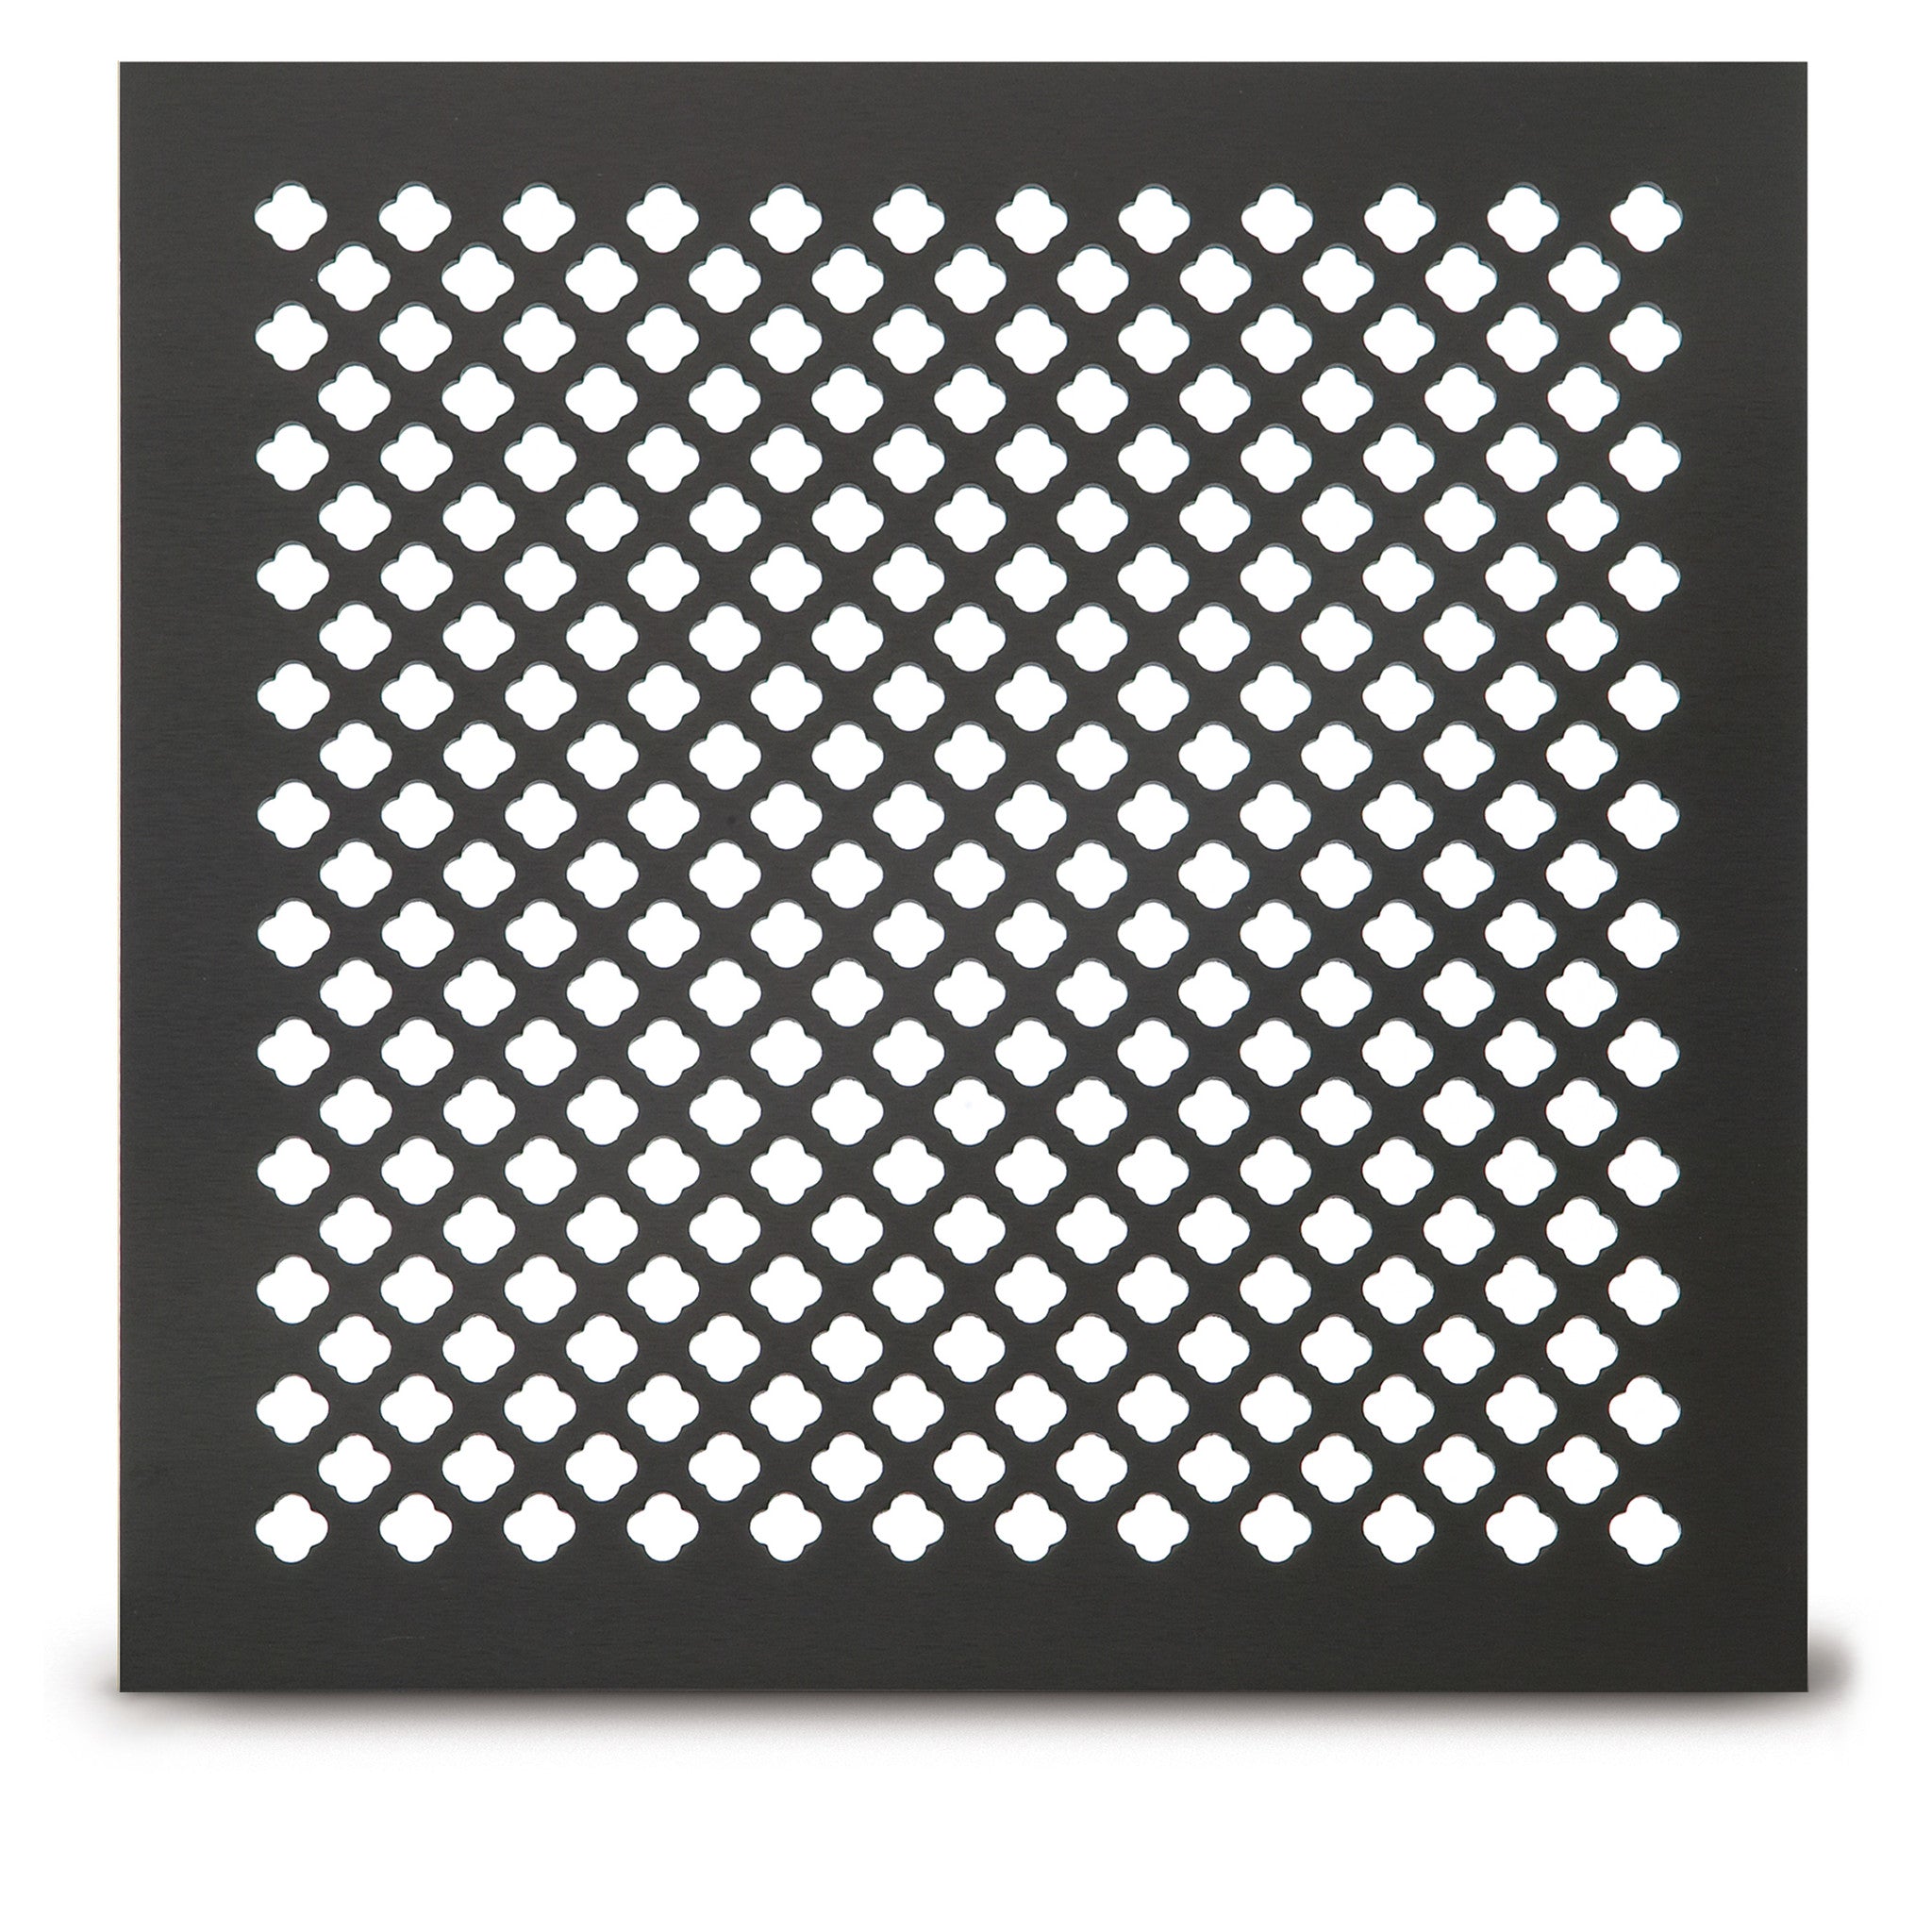 204 Clover Leaf Perforated Grille: ½” x ¼” pattern - 52% open area